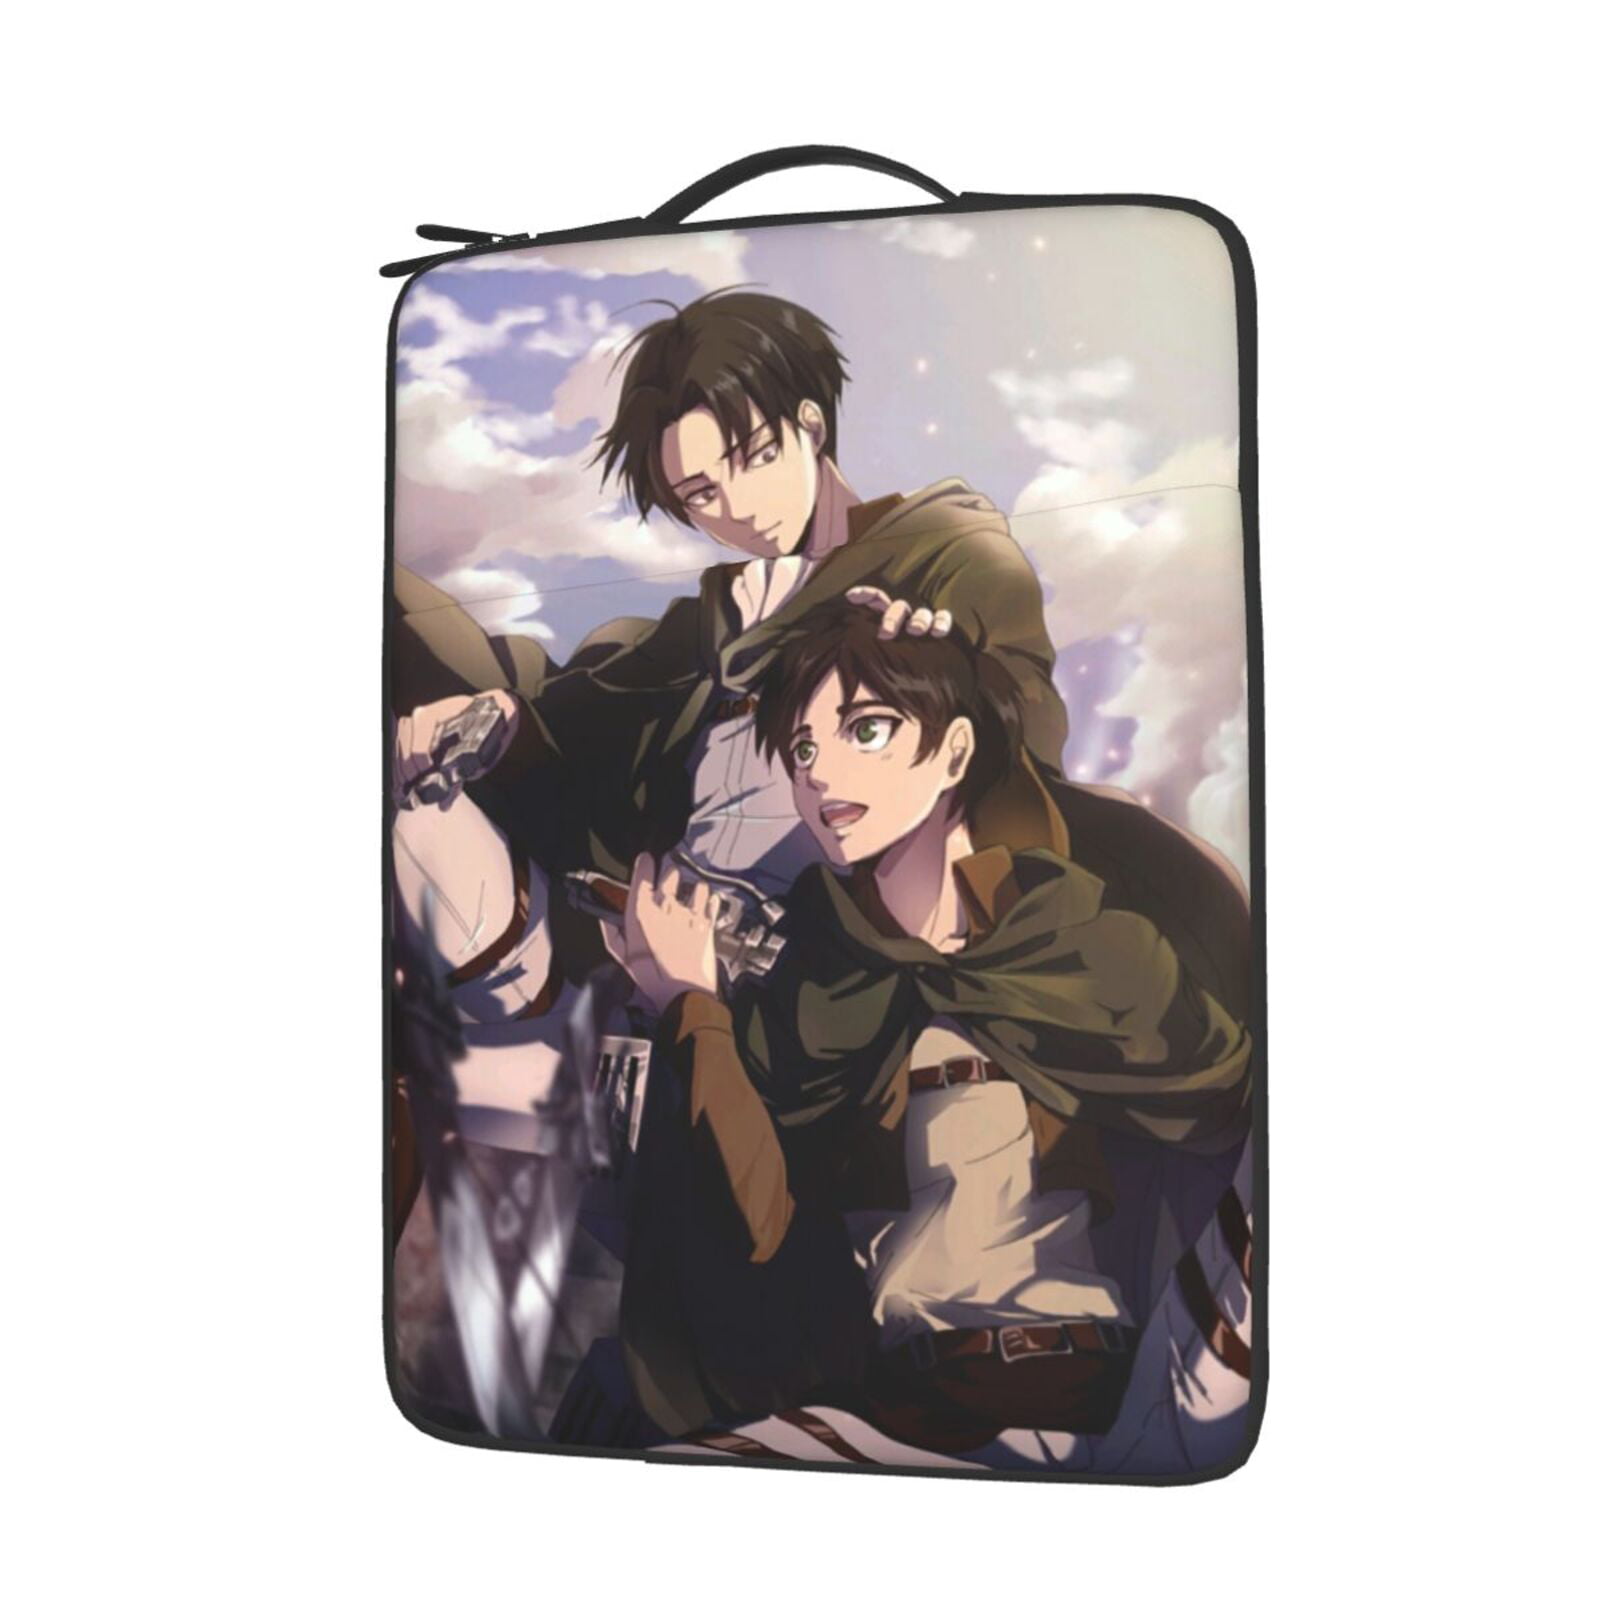 Anime Love Live Tablet Briefcase Carrying Bag Ipad Case Notebook Computer Protective Bag 15 inch Laptop Sleeve Case Multi Size